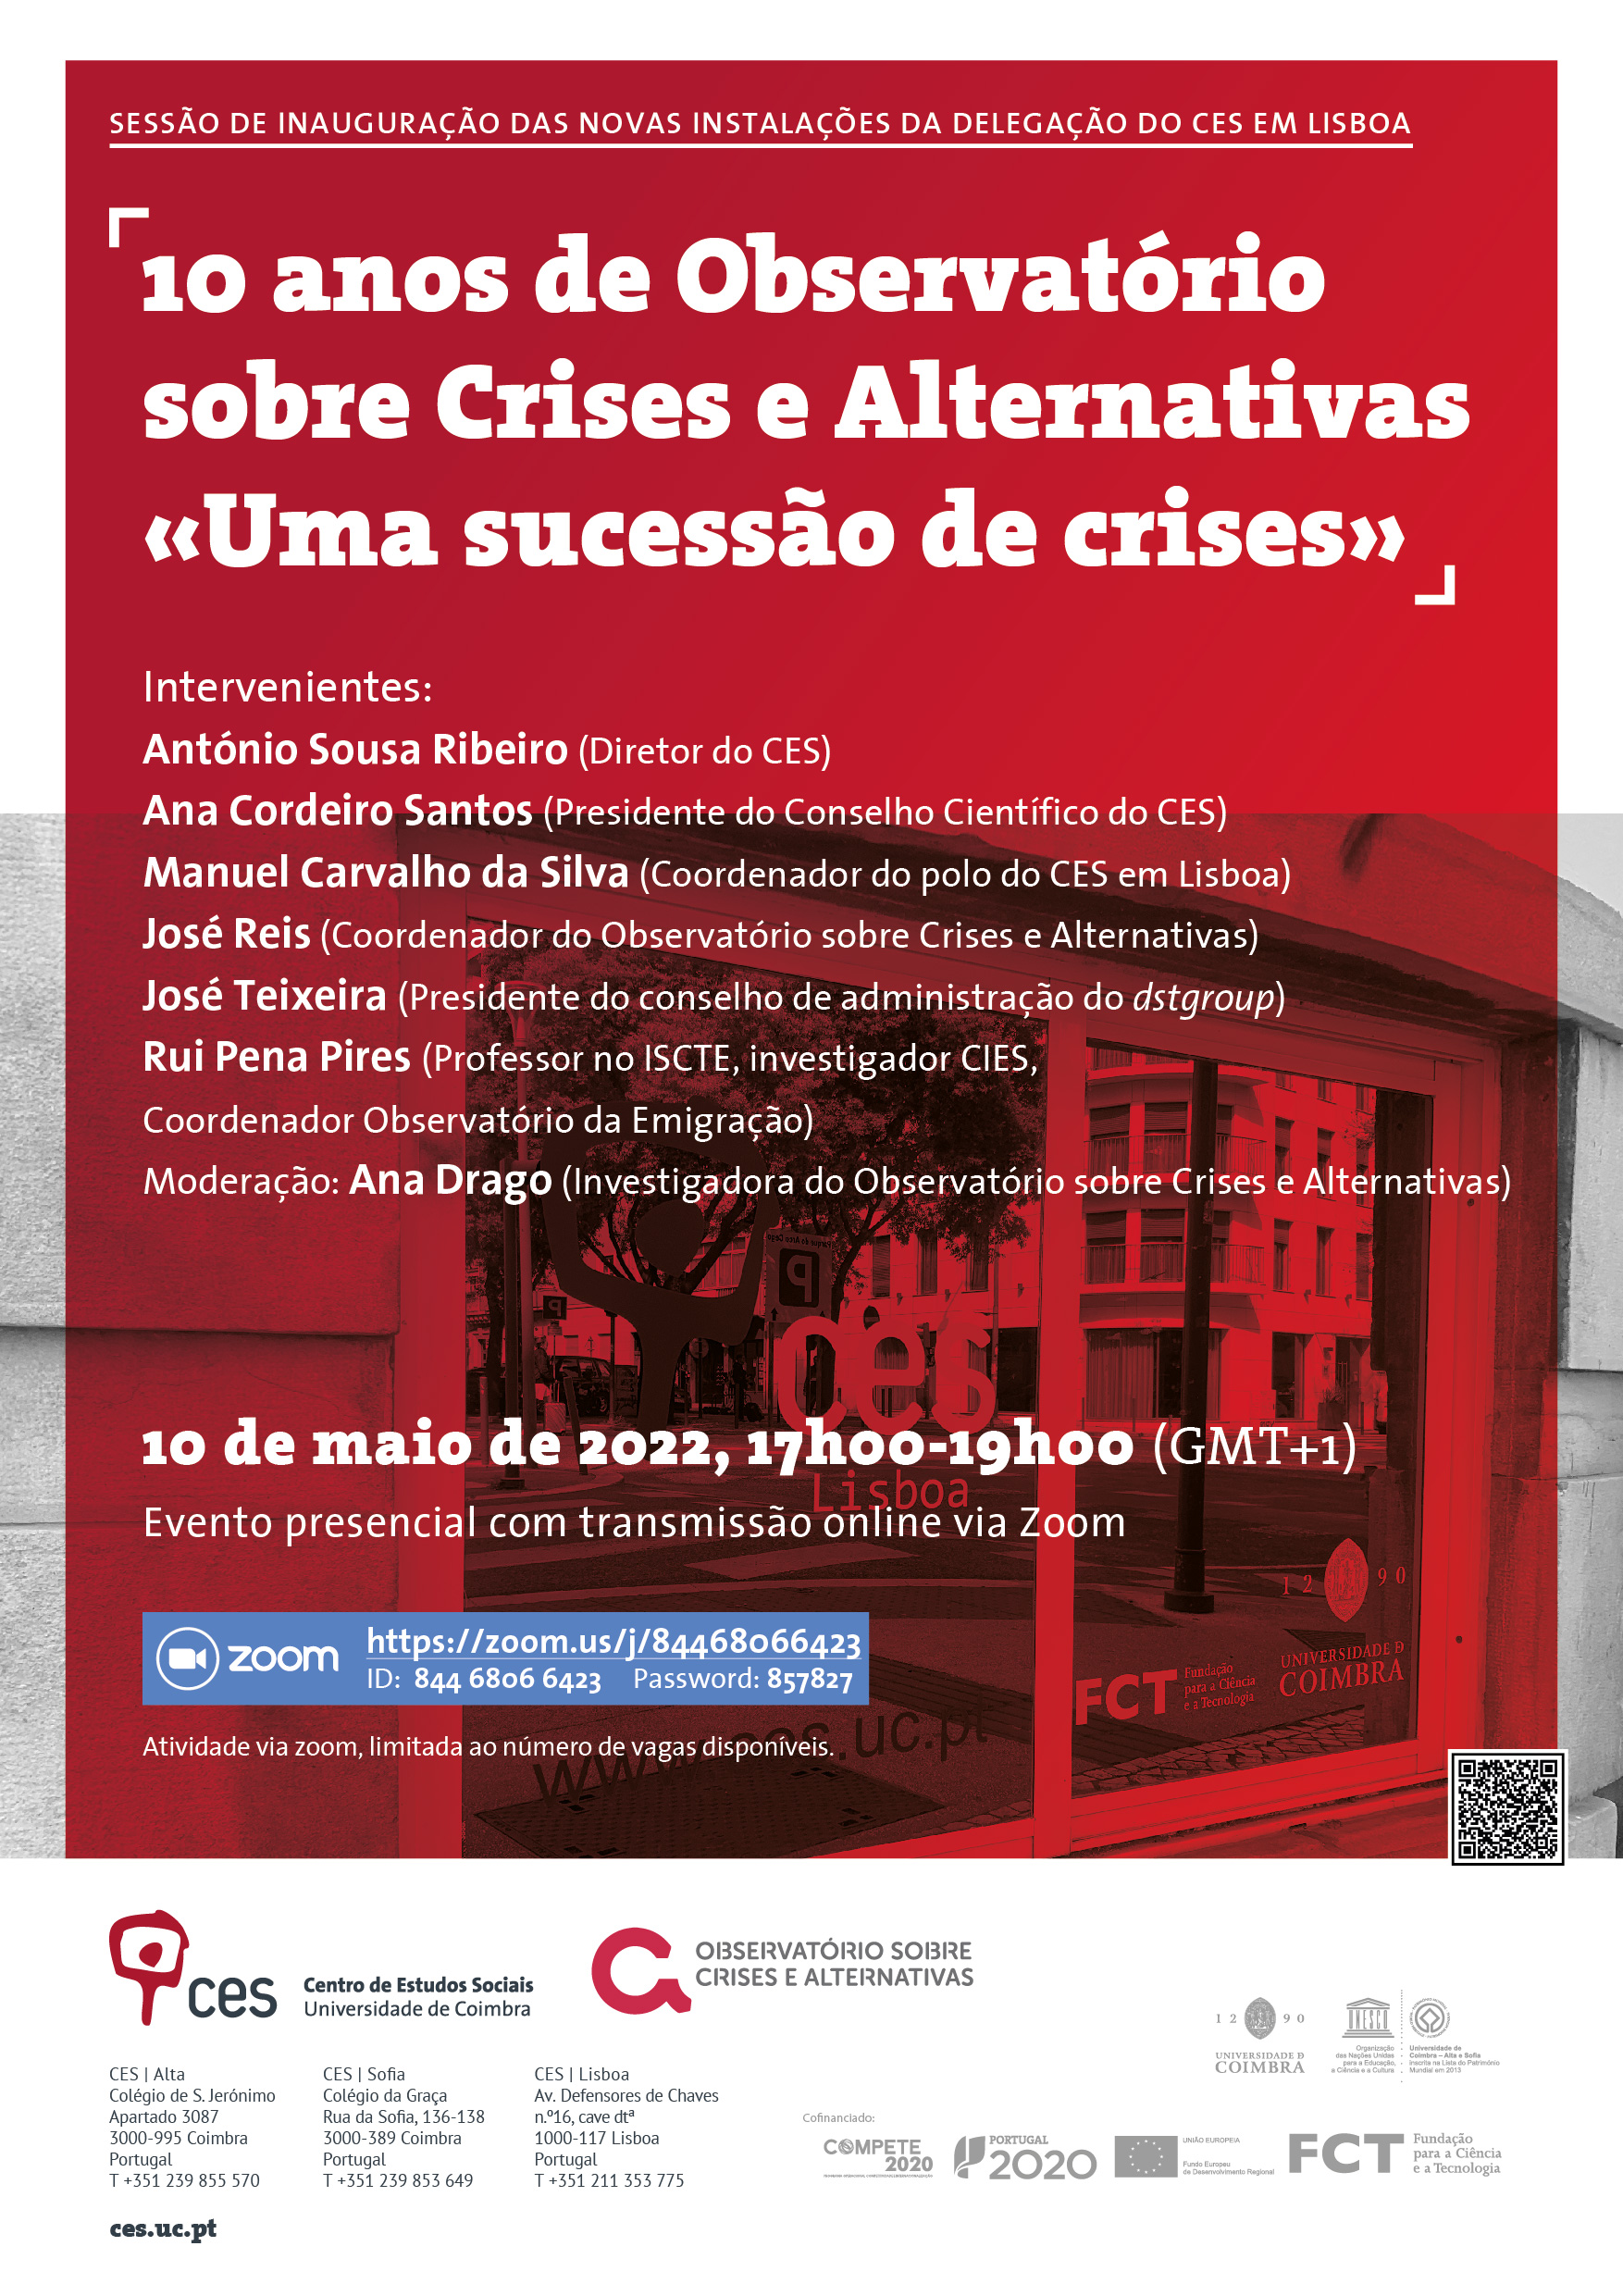 10 years of the Observatory on Crises and Alternatives «A succession of crises» <span id="edit_38552"><script>$(function() { $('#edit_38552').load( "/myces/user/editobj.php?tipo=evento&id=38552" ); });</script></span>